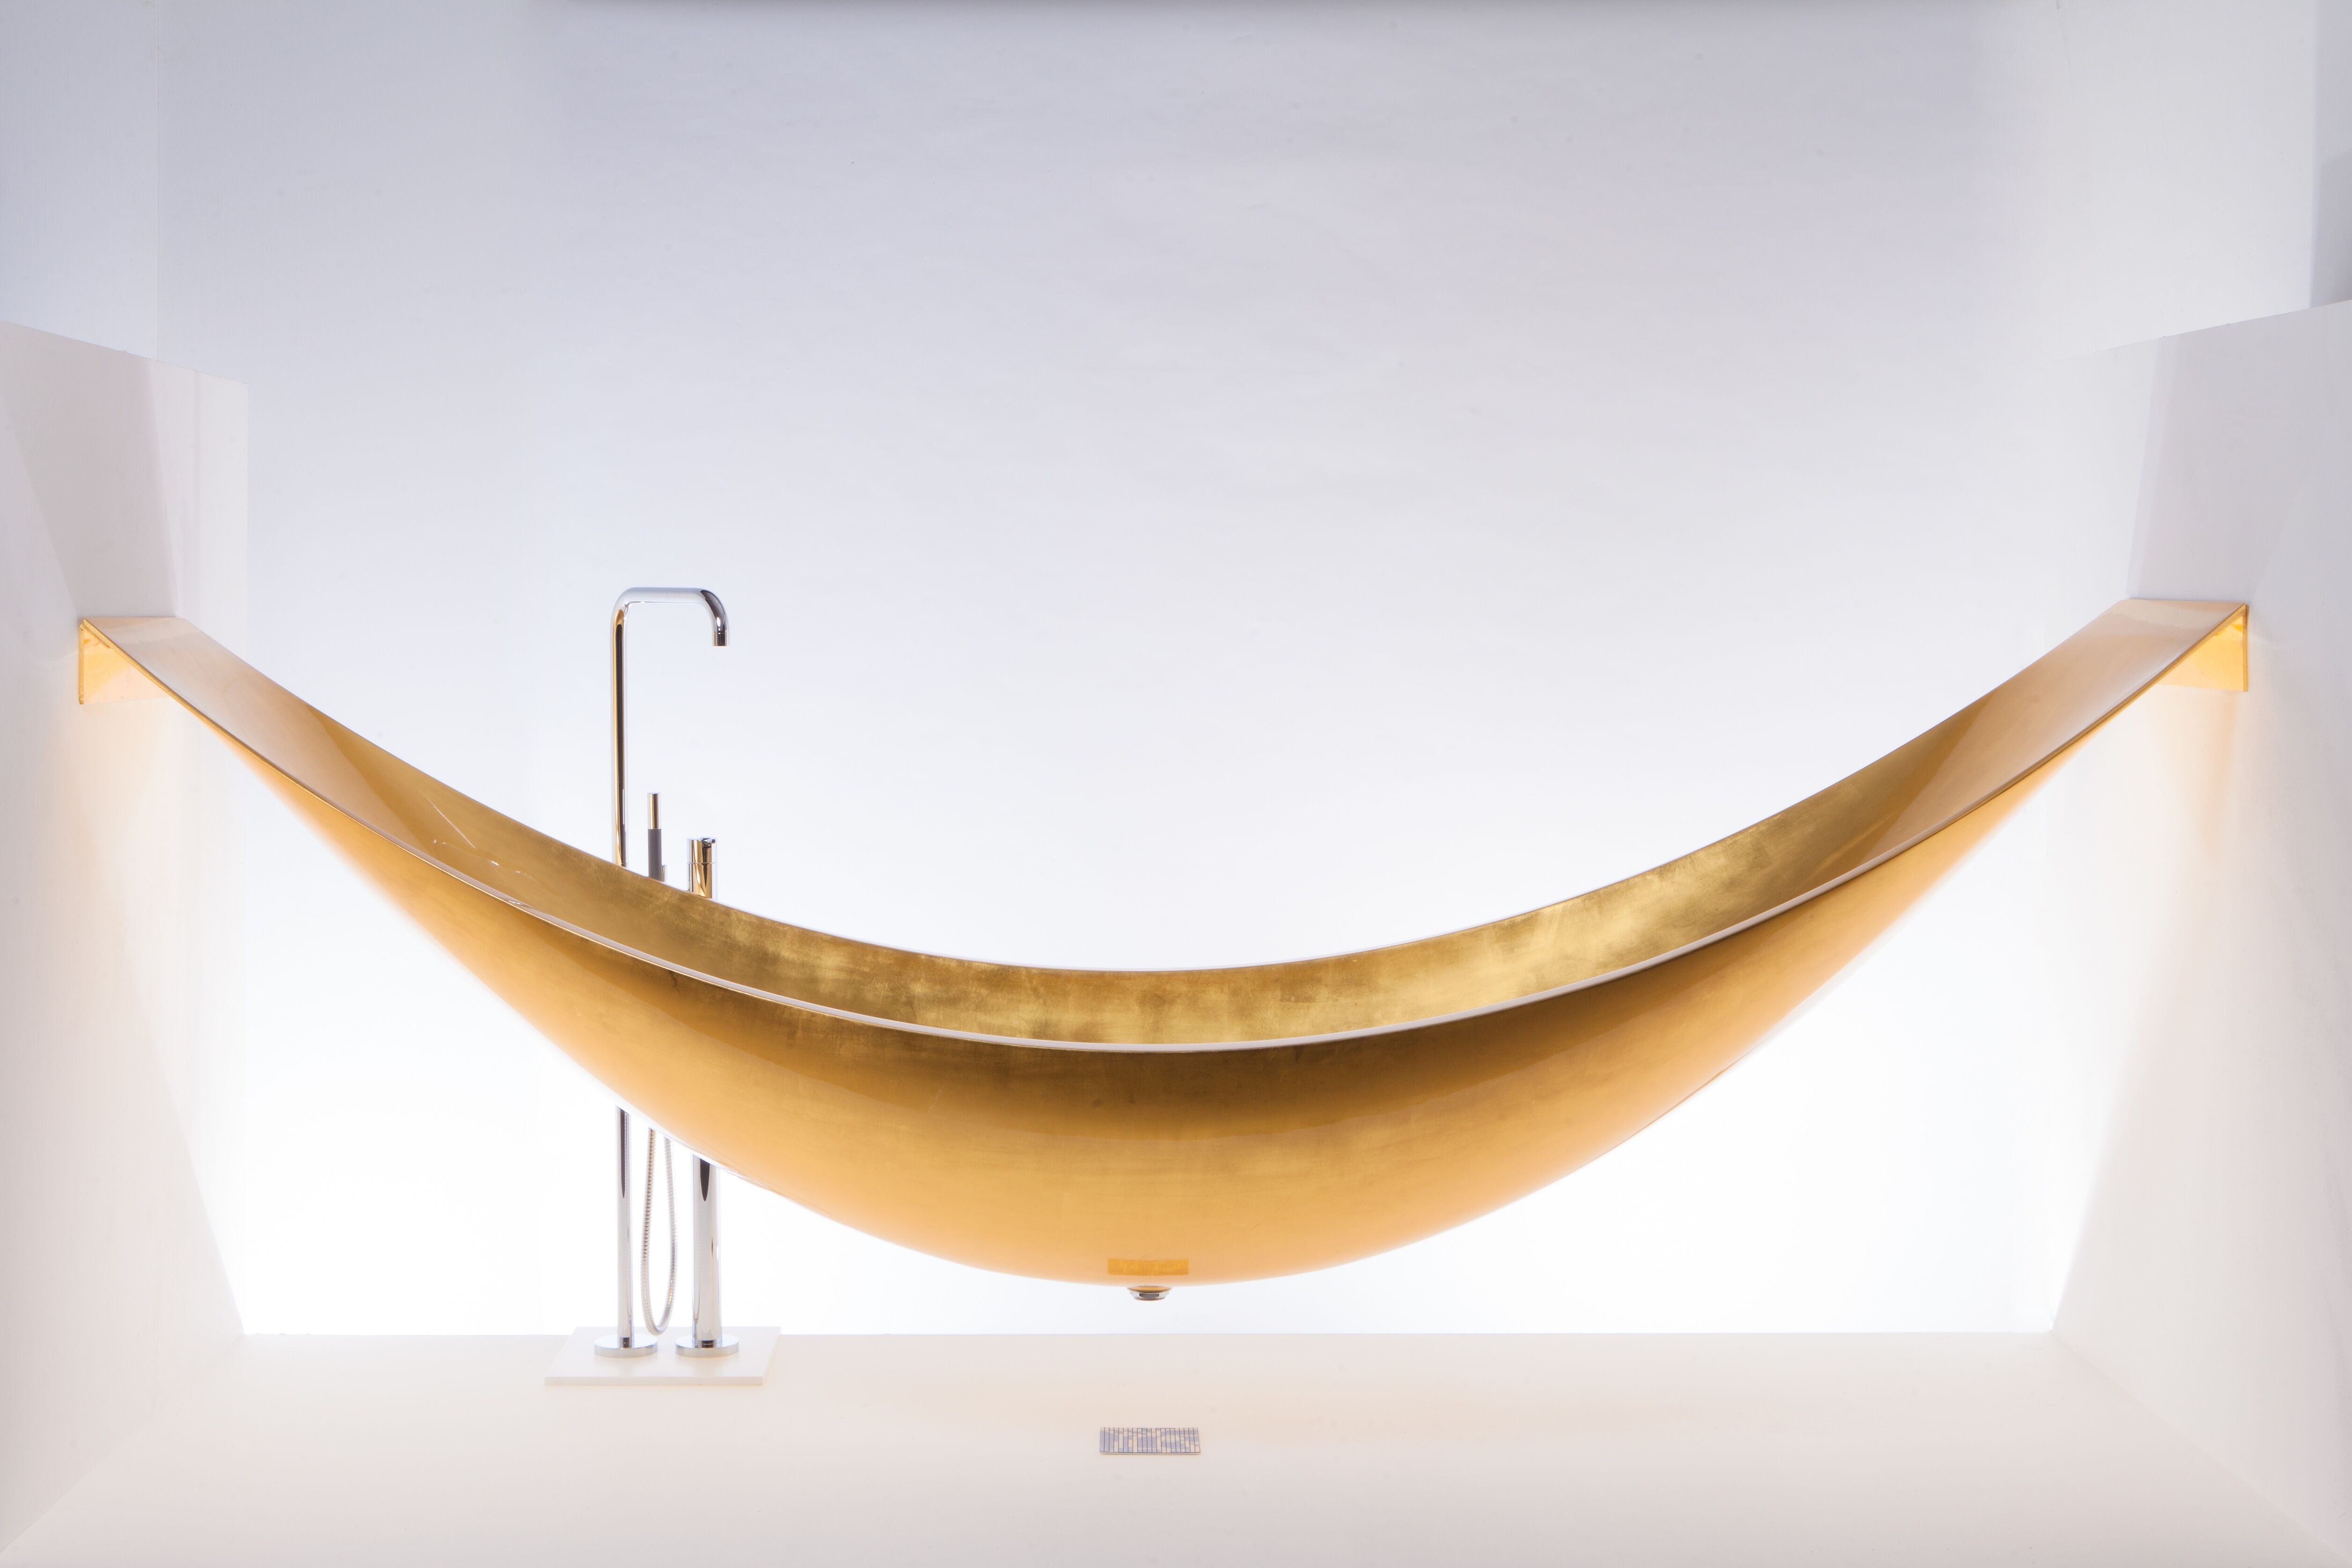 The ultimate luxury gold bath finished in 24 carrot gold manufactured by Splinterworks